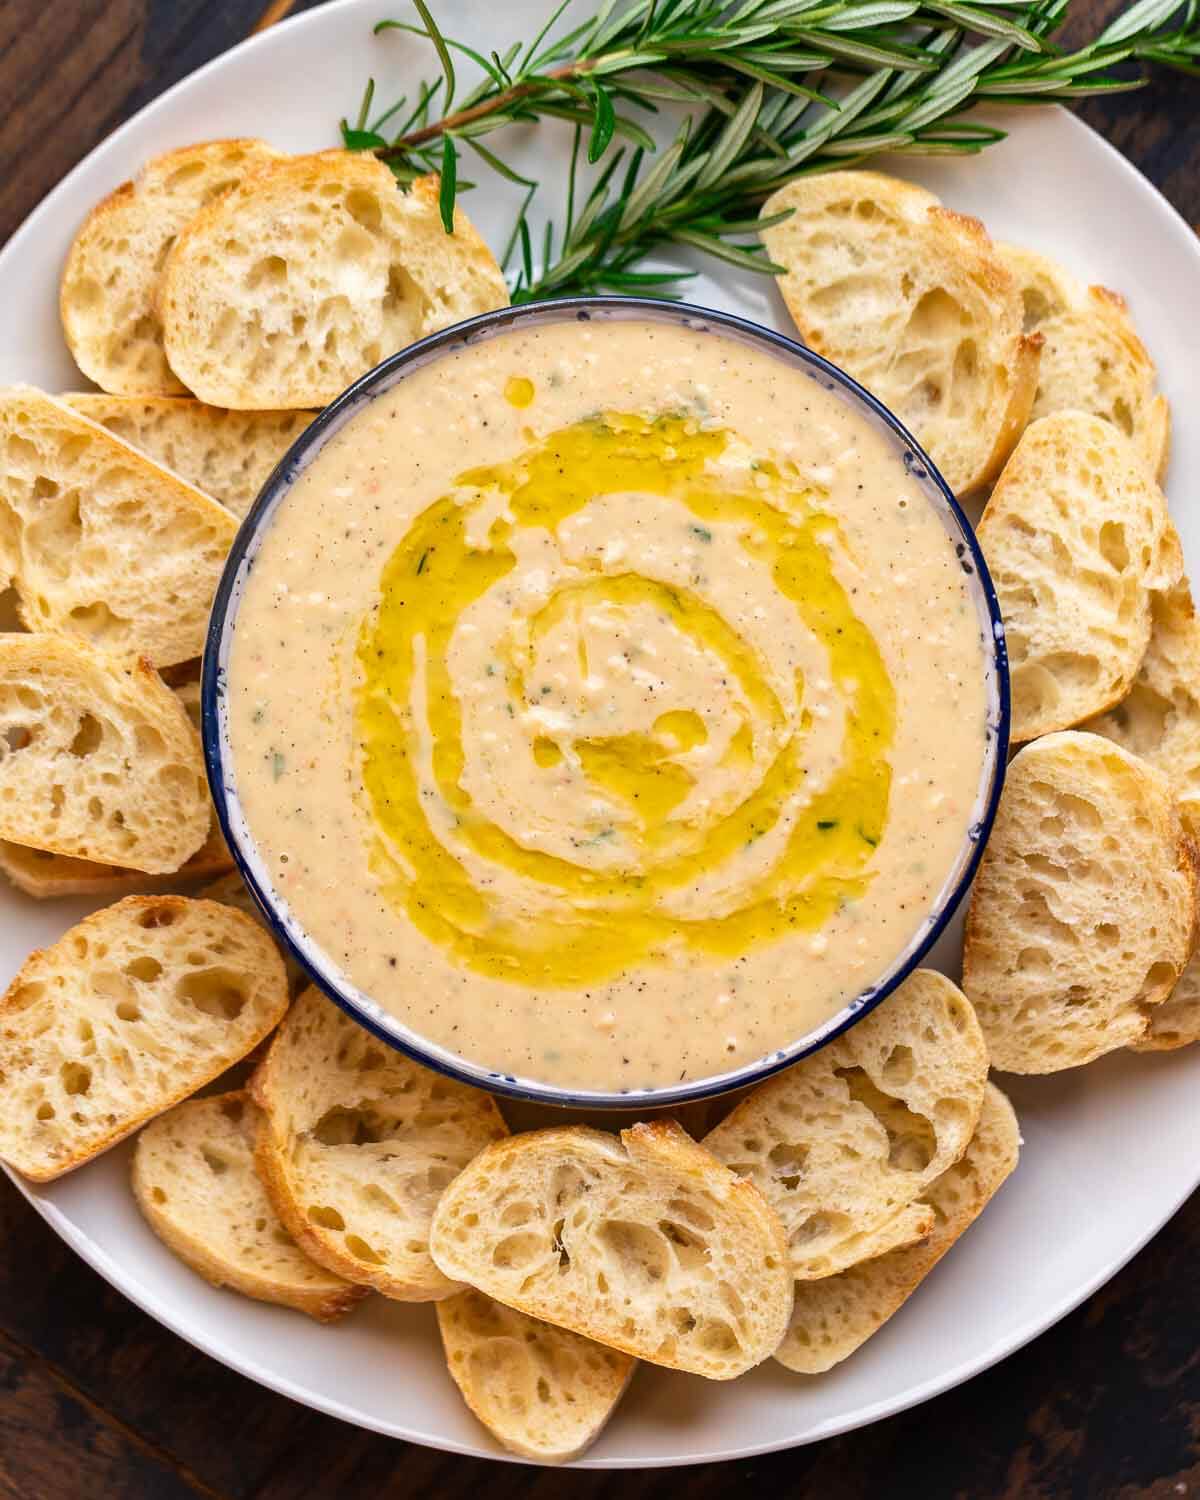 Overhead shot of cannellini bean dip platter with crostini and rosemary garnish.